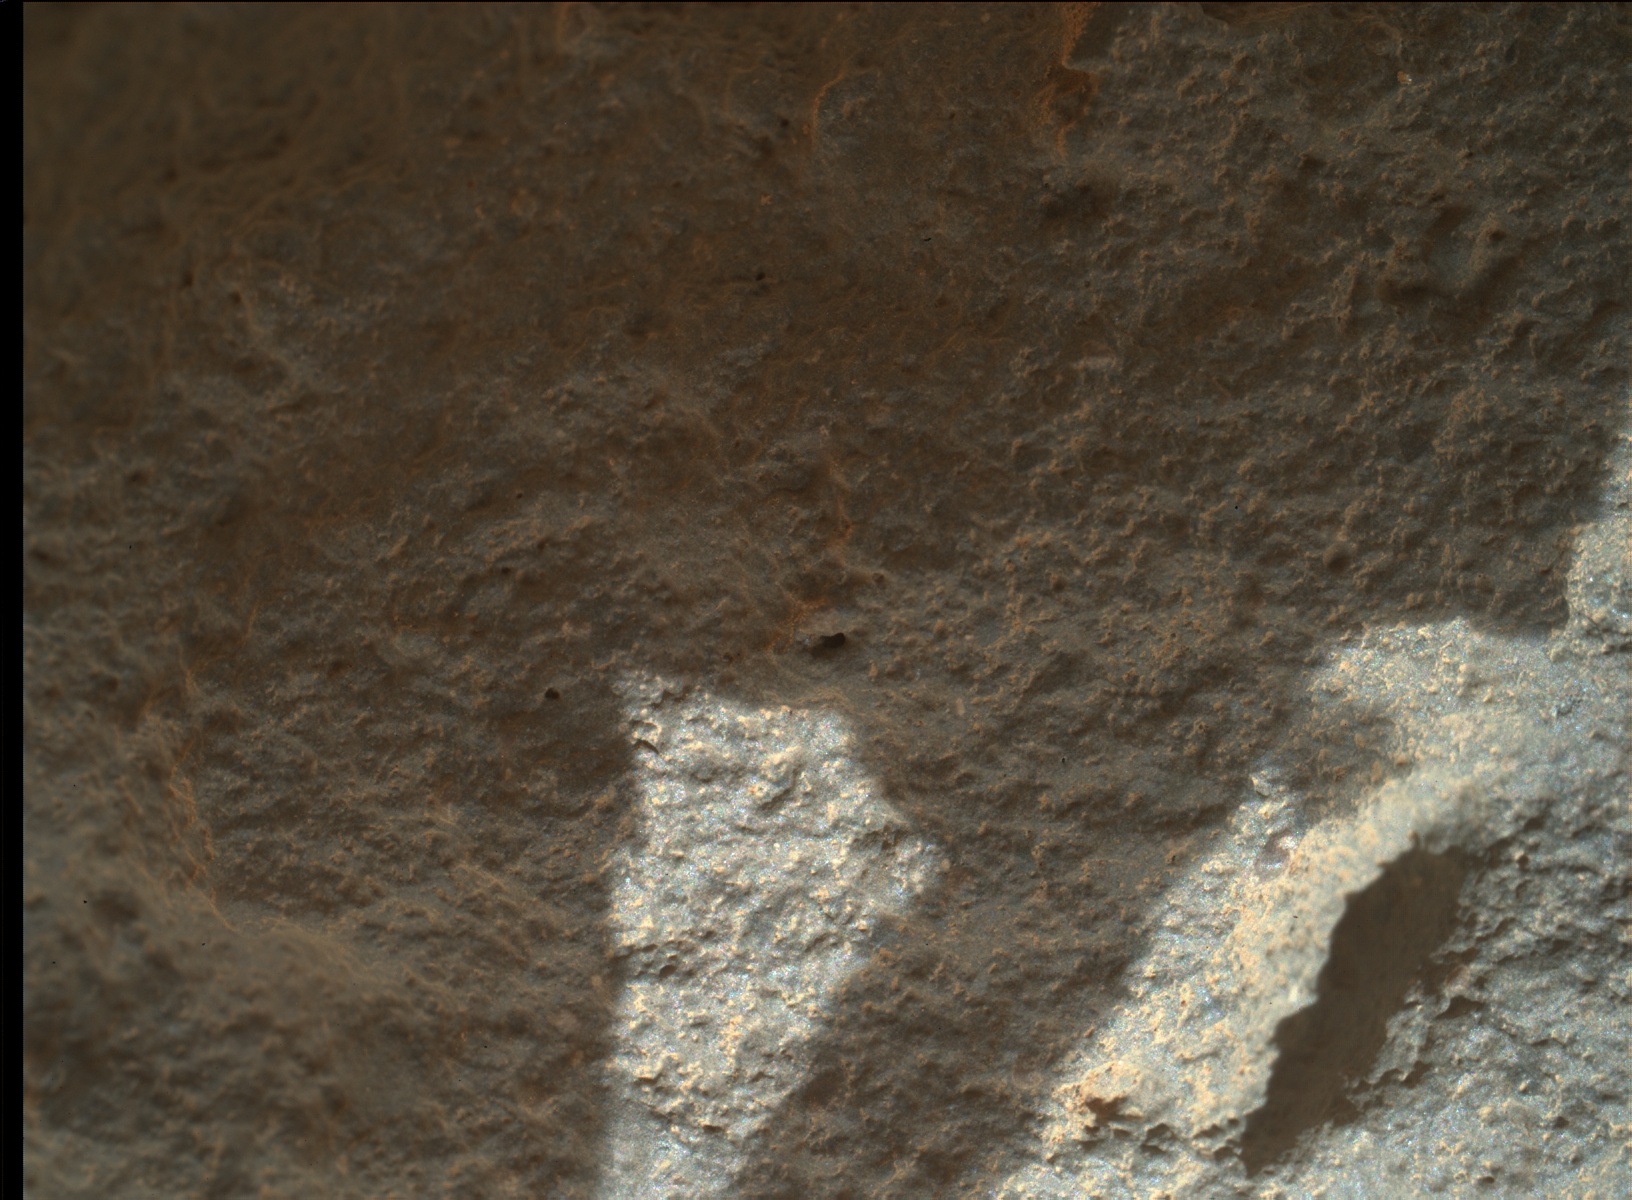 Nasa's Mars rover Curiosity acquired this image using its Mars Hand Lens Imager (MAHLI) on Sol 442